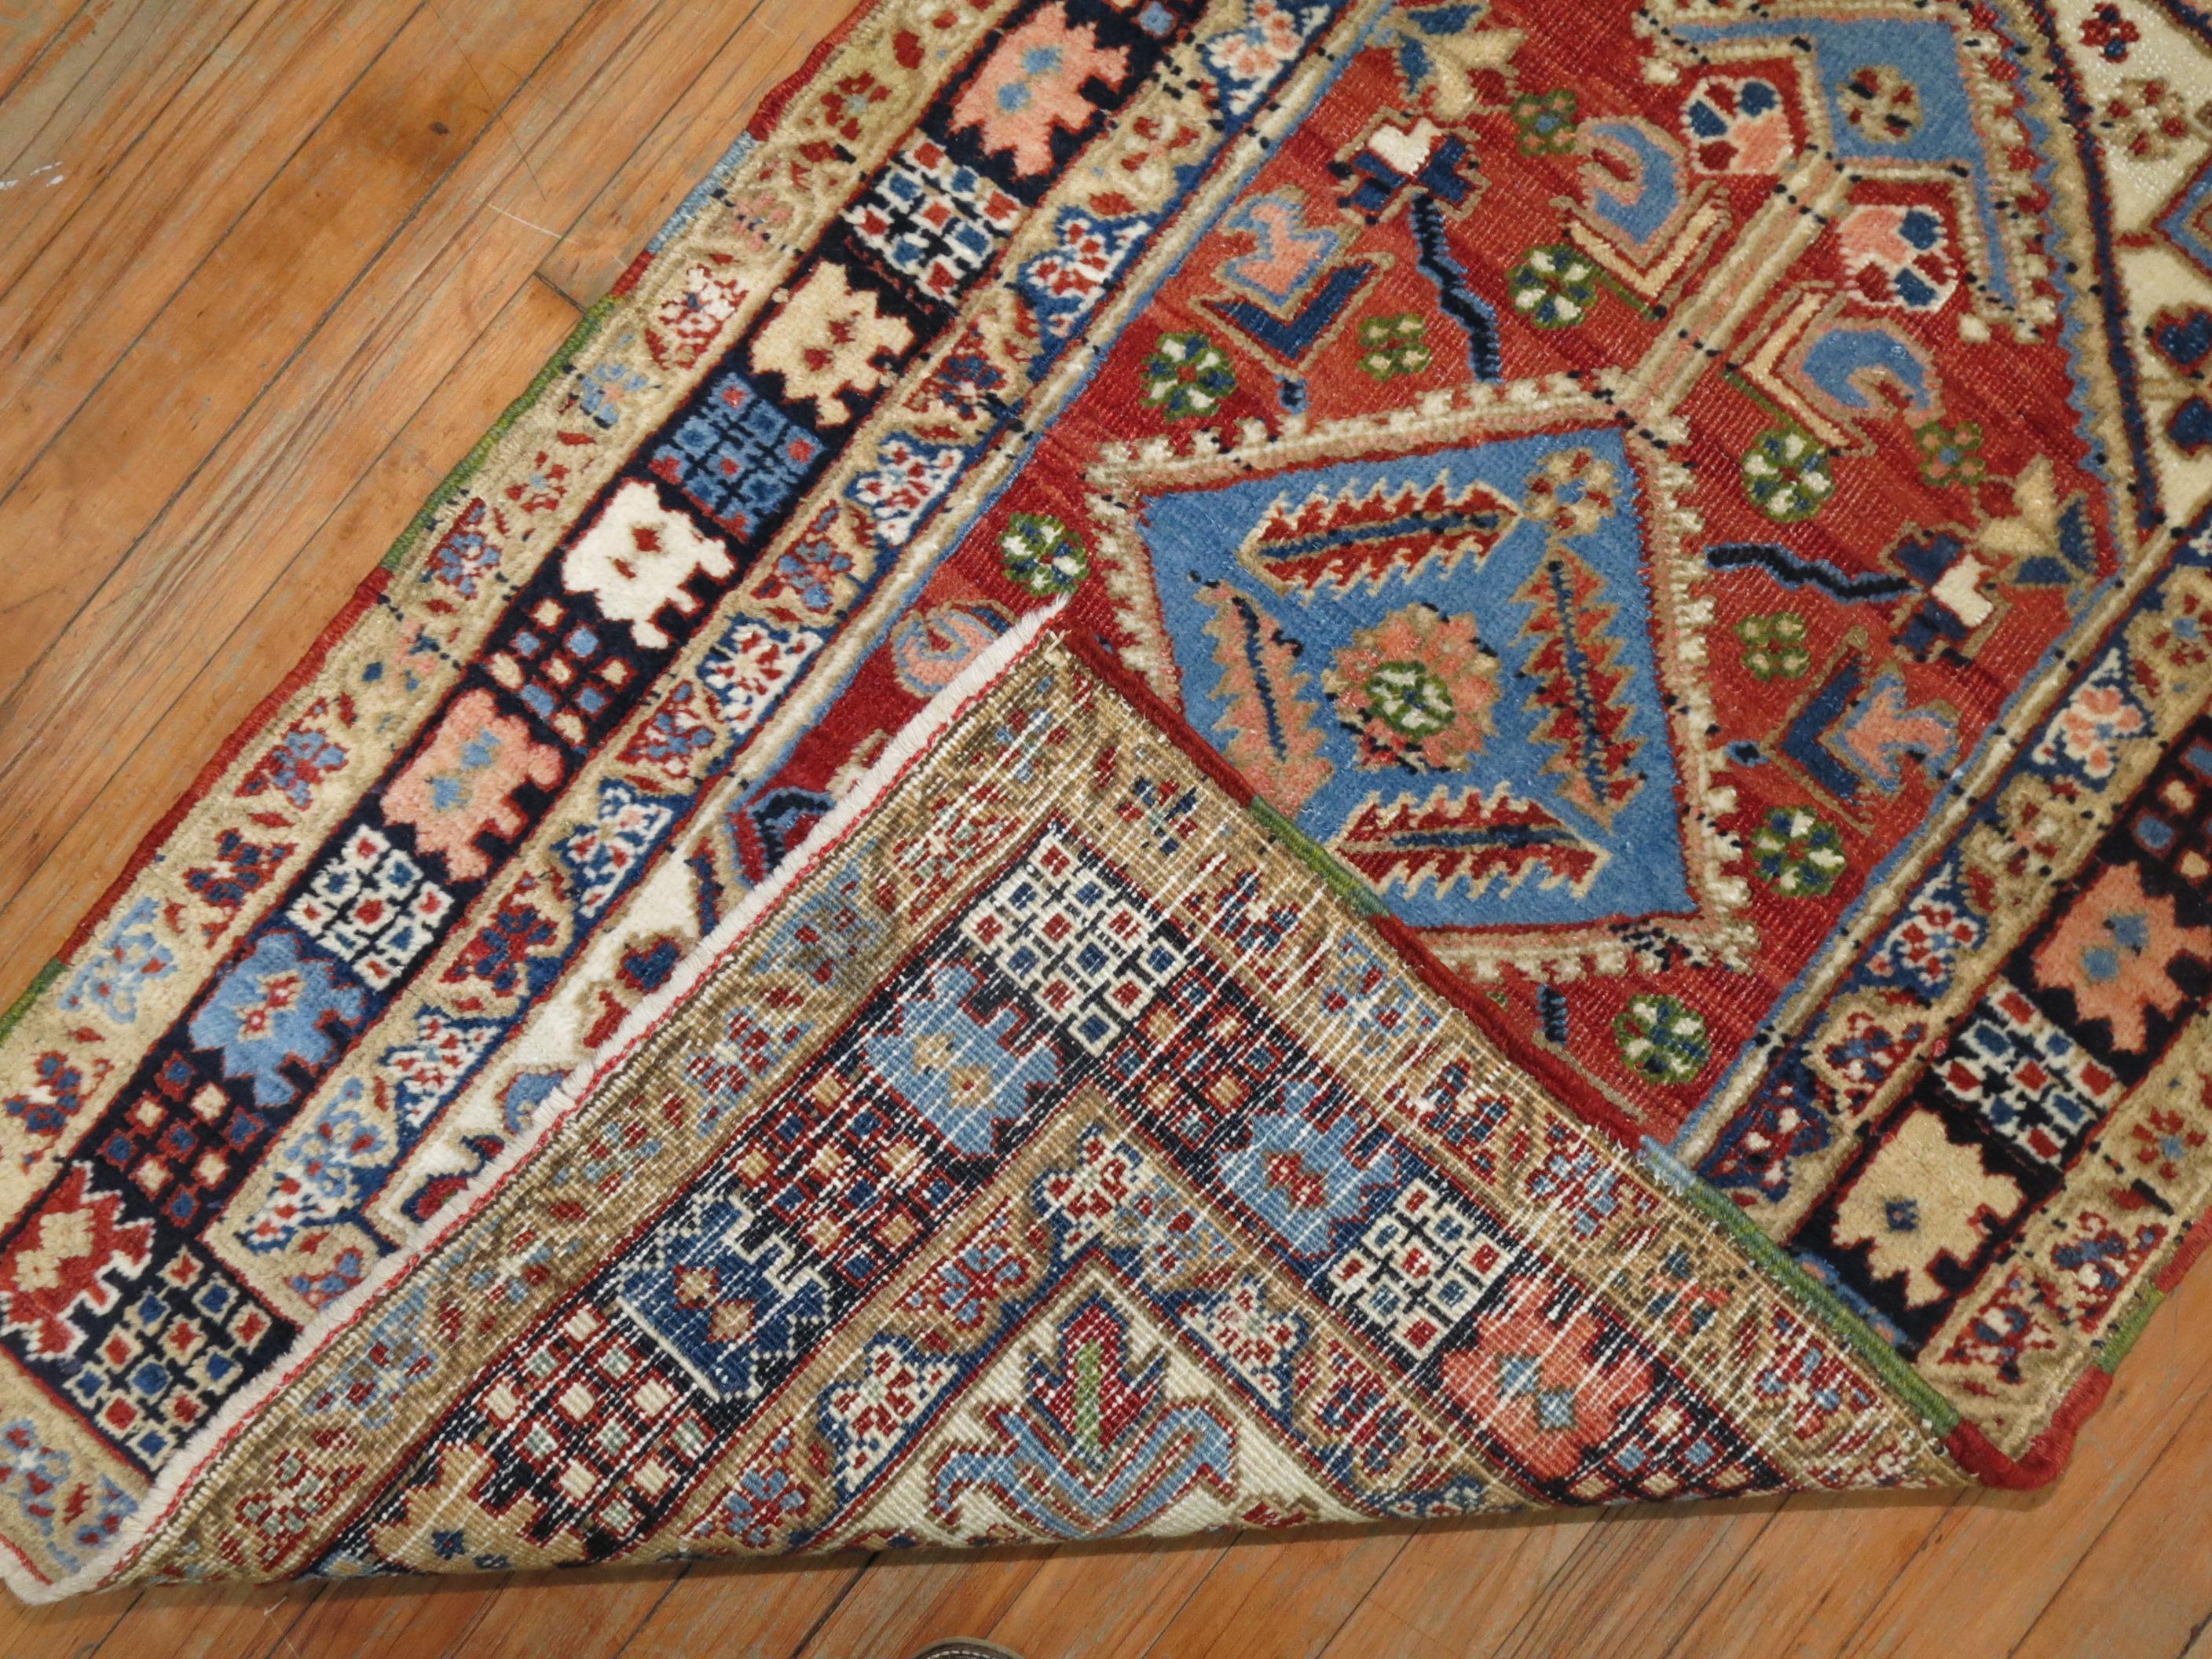 Hand-Woven Colorful Scatter Size Antique Persian Heriz Rug